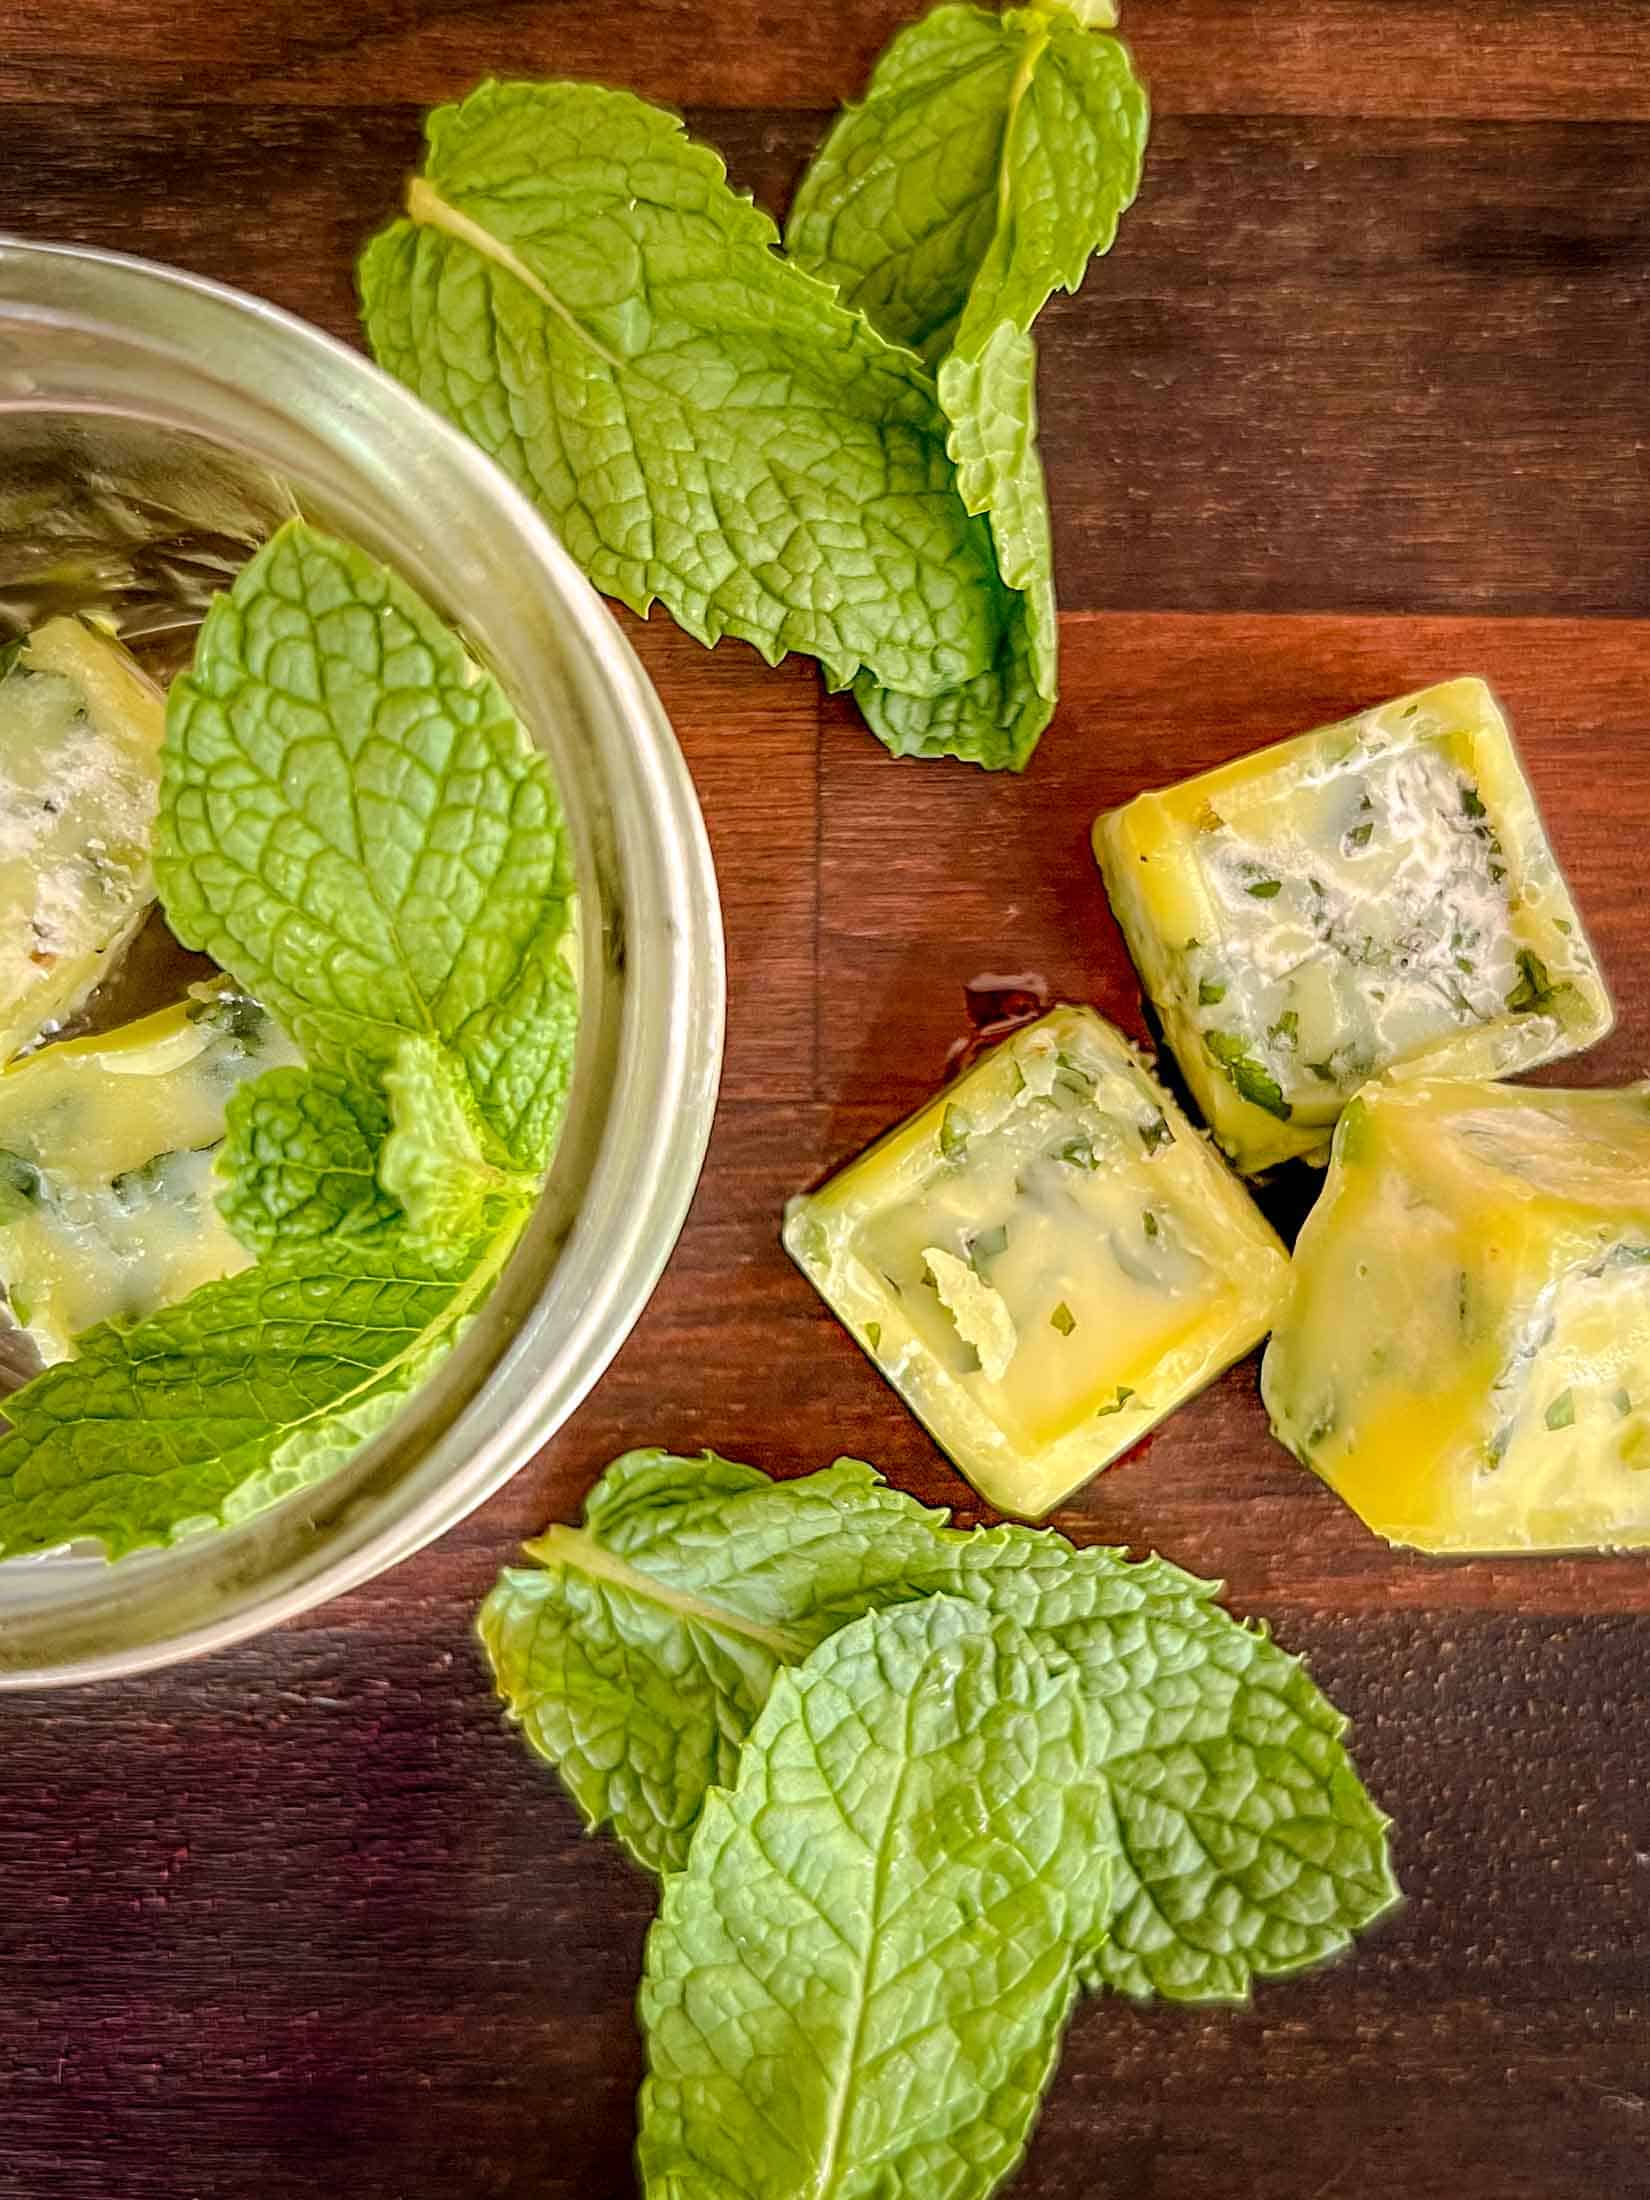 Mint leaves chopped and frozen in olive oil in cube form with fresh mint leaves as garnish.